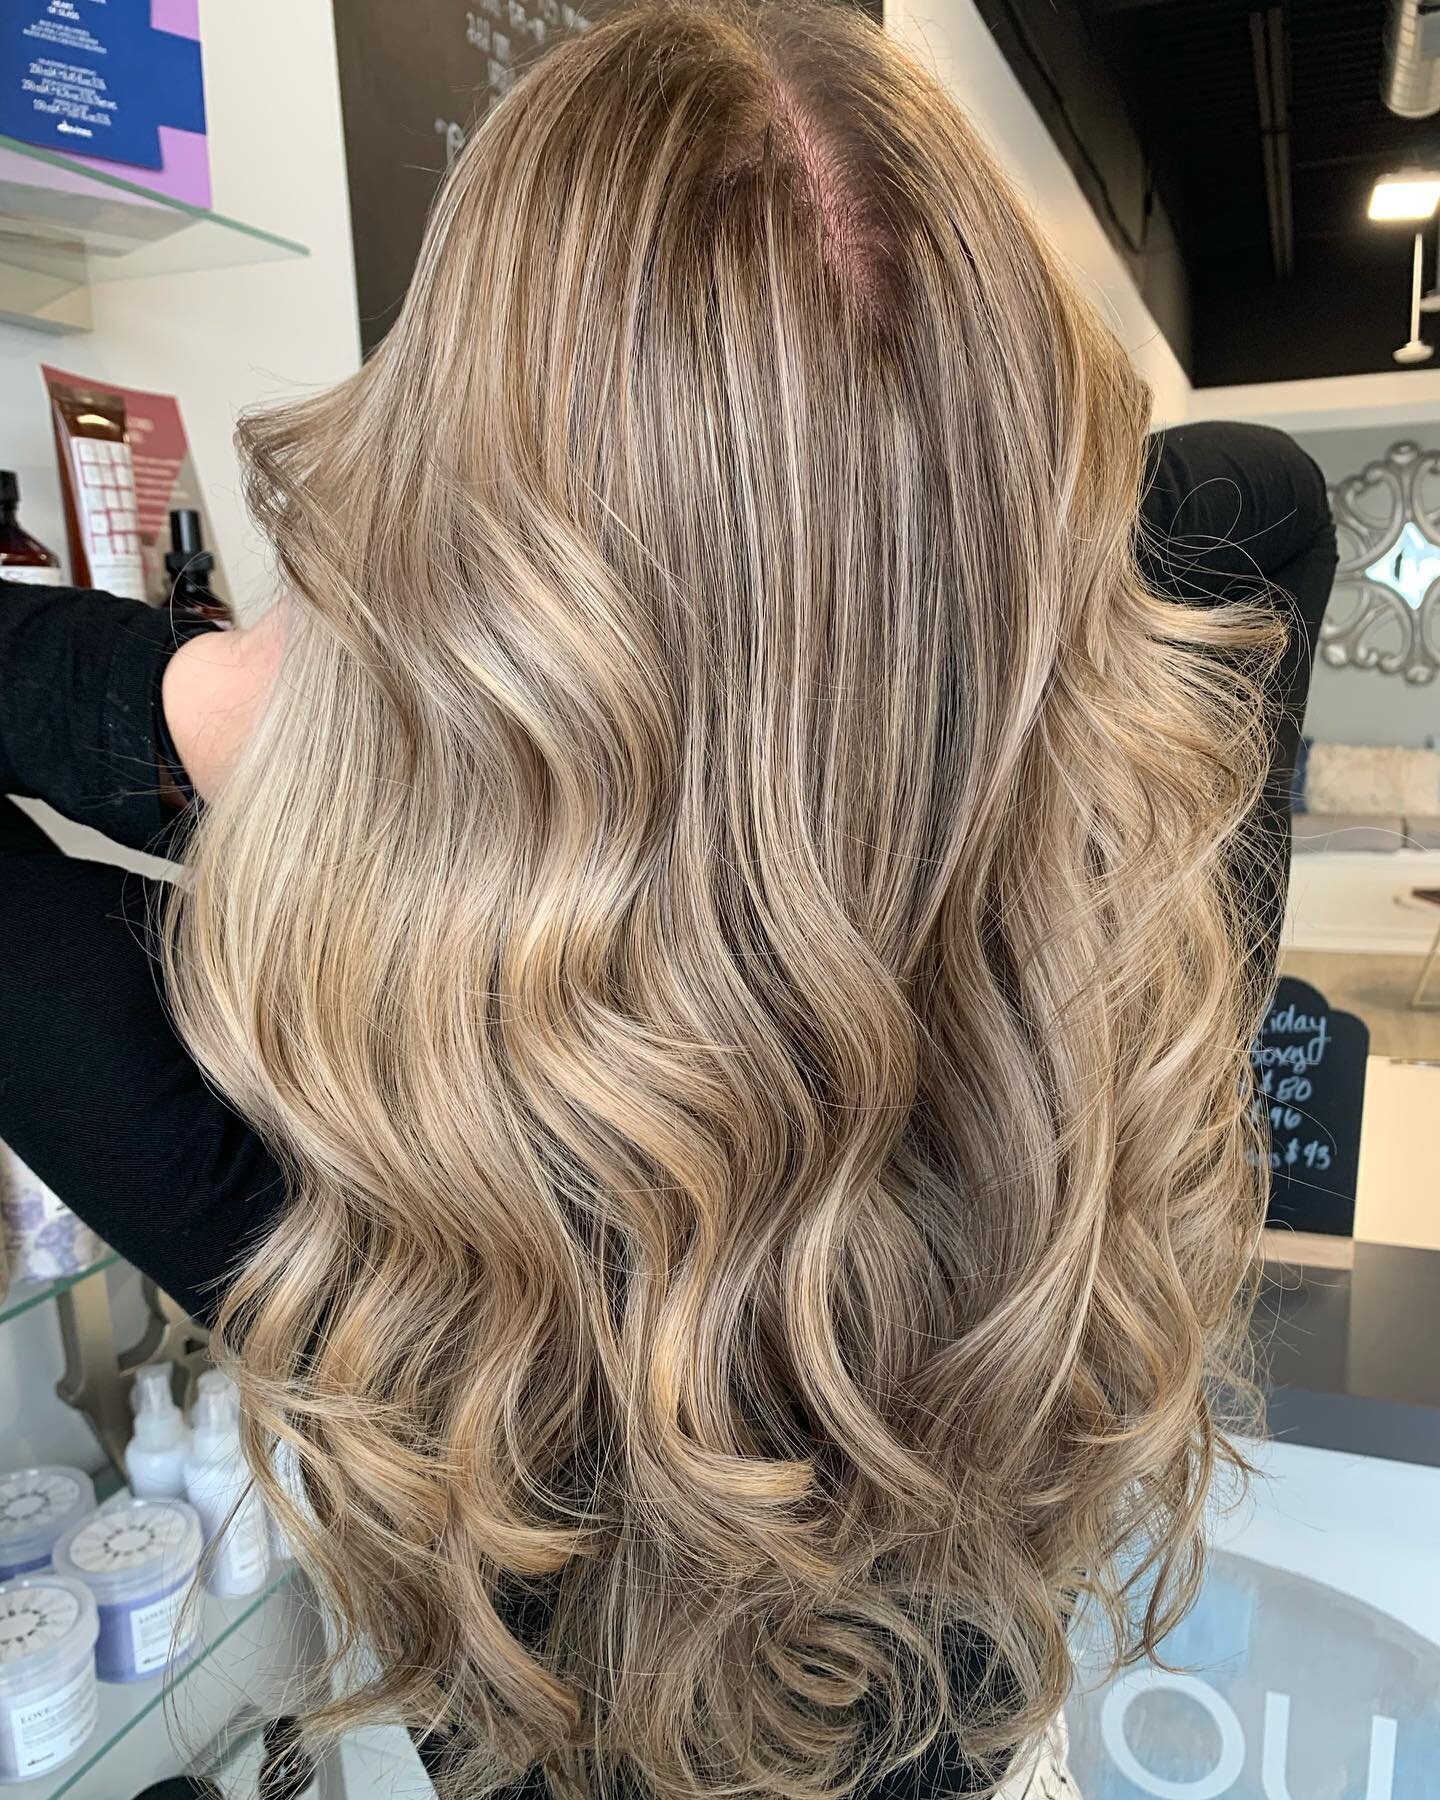 Snowy days can&rsquo;t stop us from doing what we do best! ❄️ 
__________________________________________________
#snowday #elleairebuffalo #blondehair #hairtransformation #highlights #highlightlowlight #softcurls #davines #davinescolor #davinesnorth